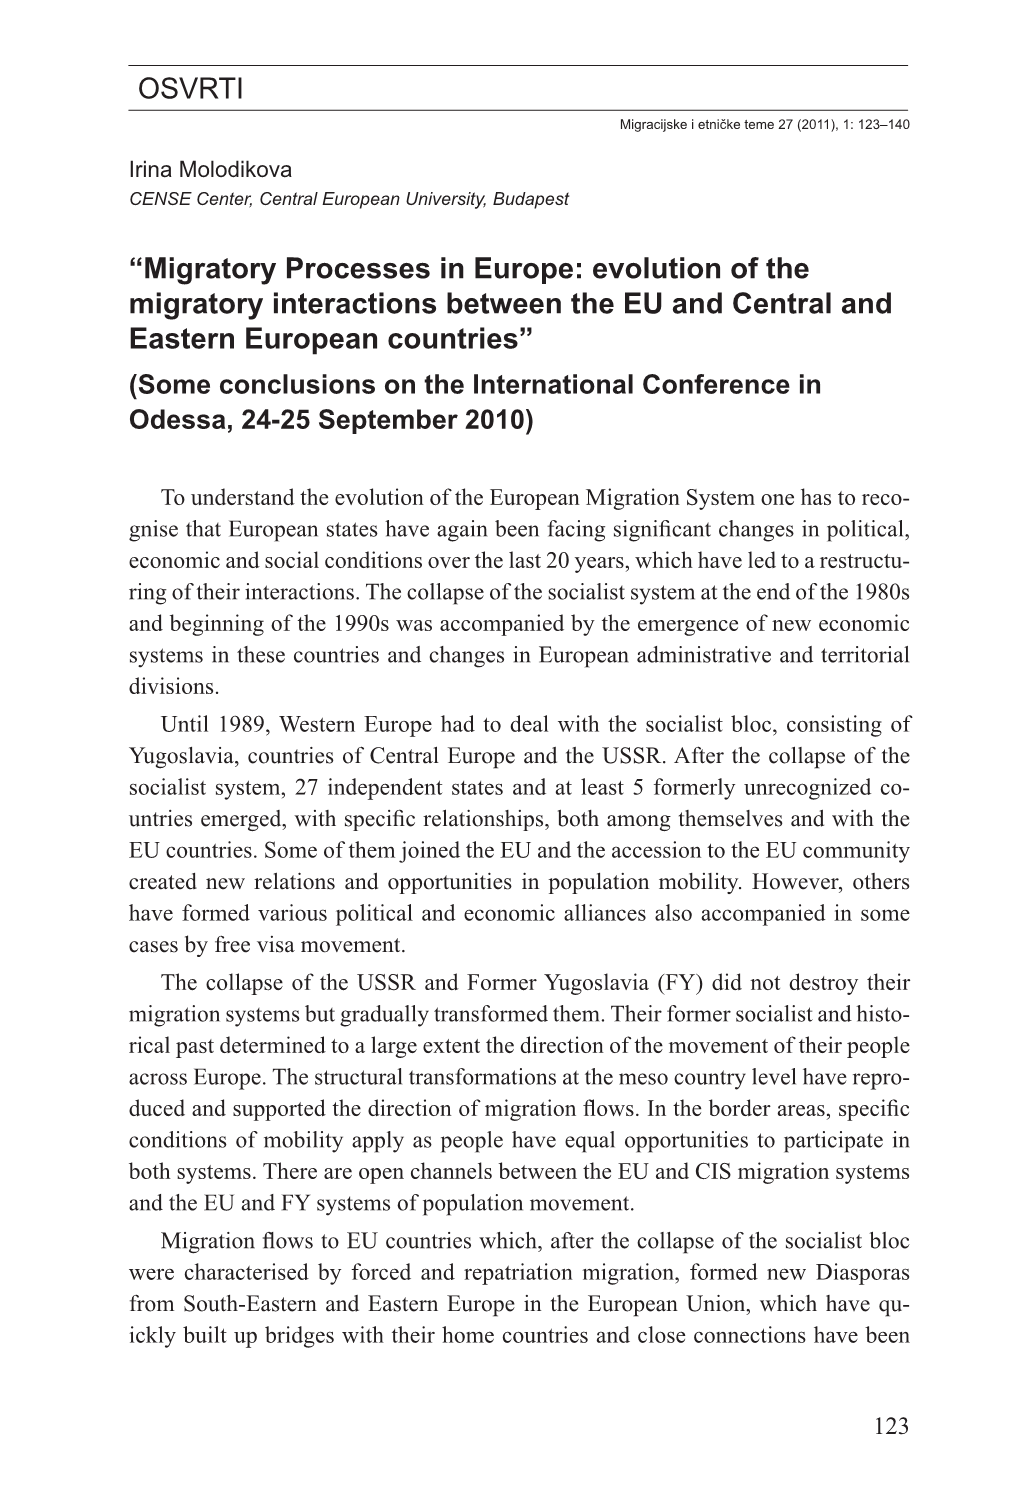 OSVRTI “Migratory Processes in Europe: Evolution of the Migratory Interactions Between the EU and Central and Eastern European